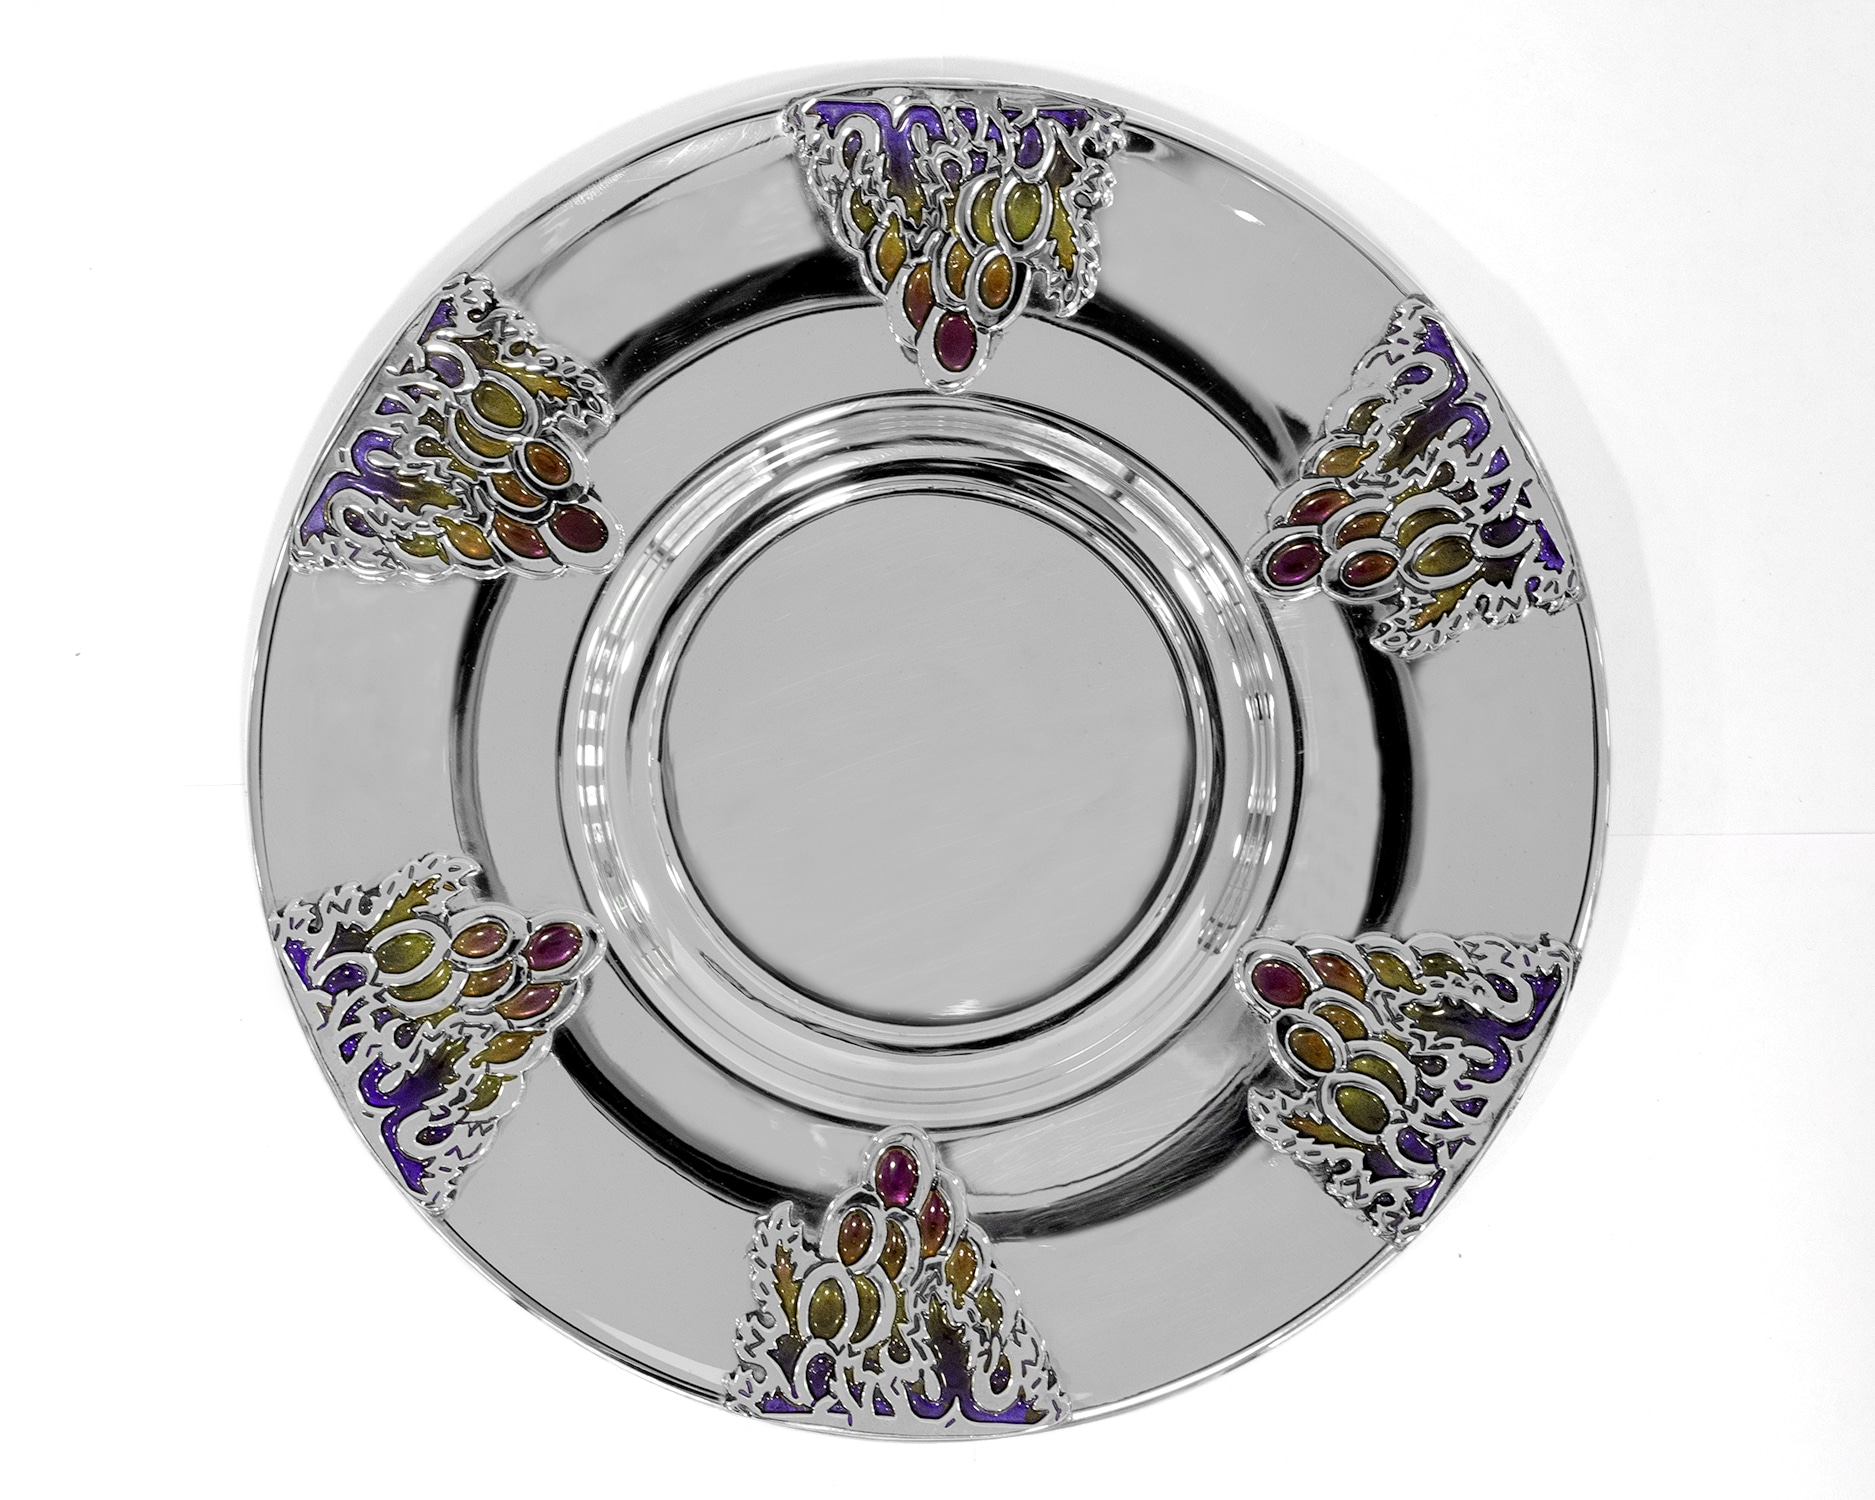 Plate for Kiddush Cup Set with Grapes Elements & Enamel